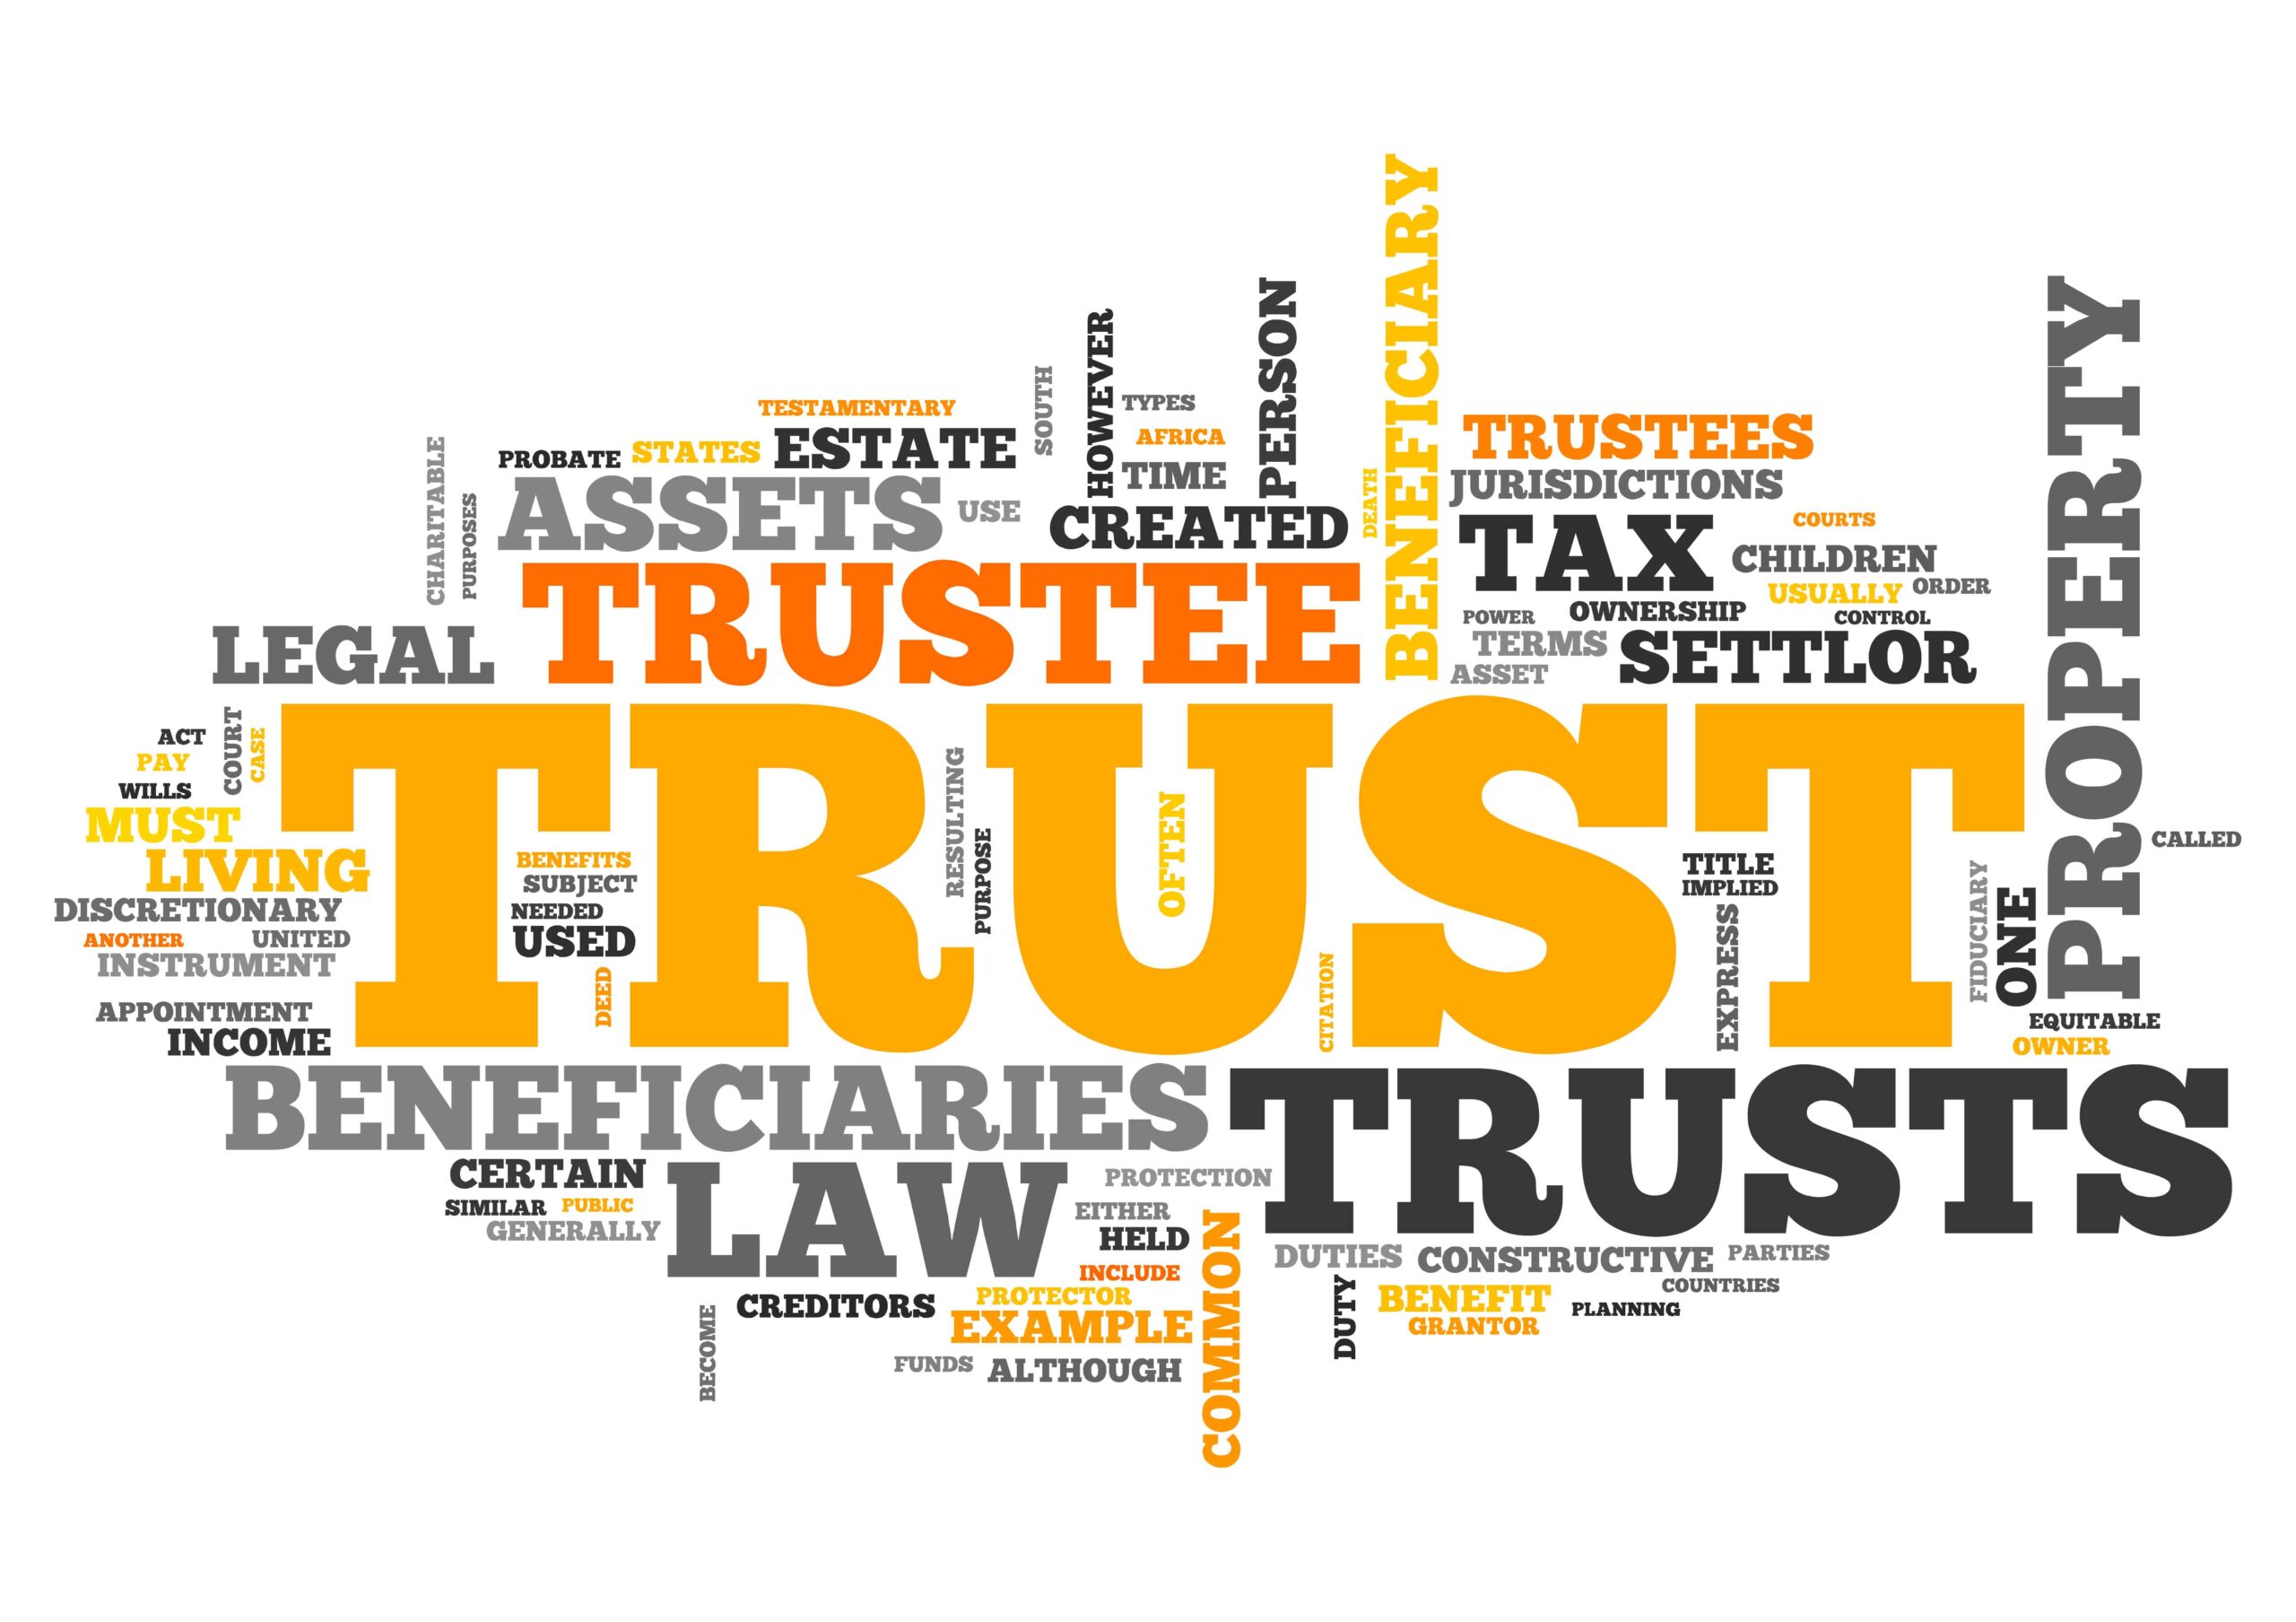 Reviewing trust investments